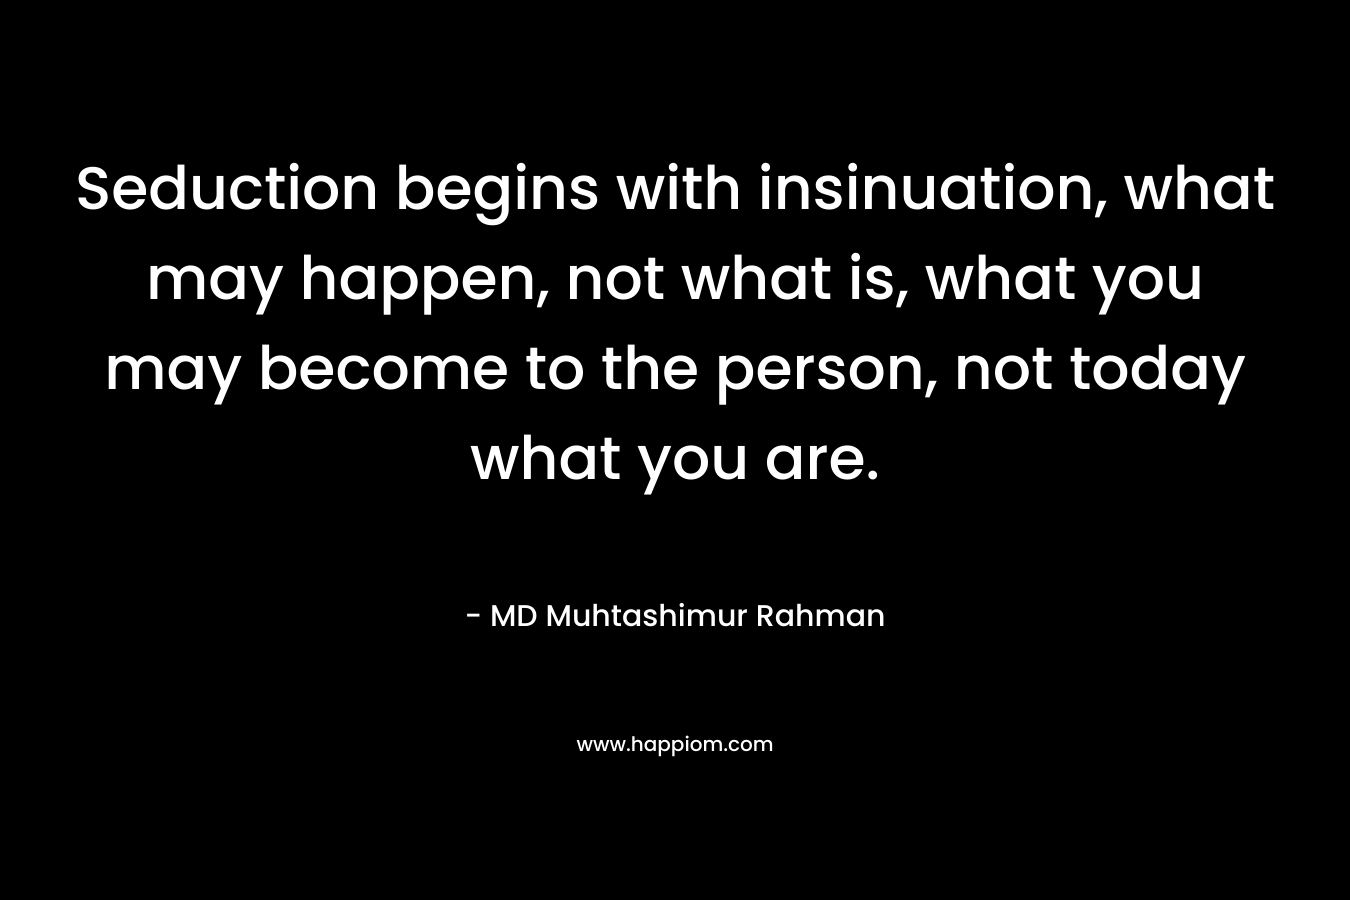 Seduction begins with insinuation, what may happen, not what is, what you may become to the person, not today what you are.